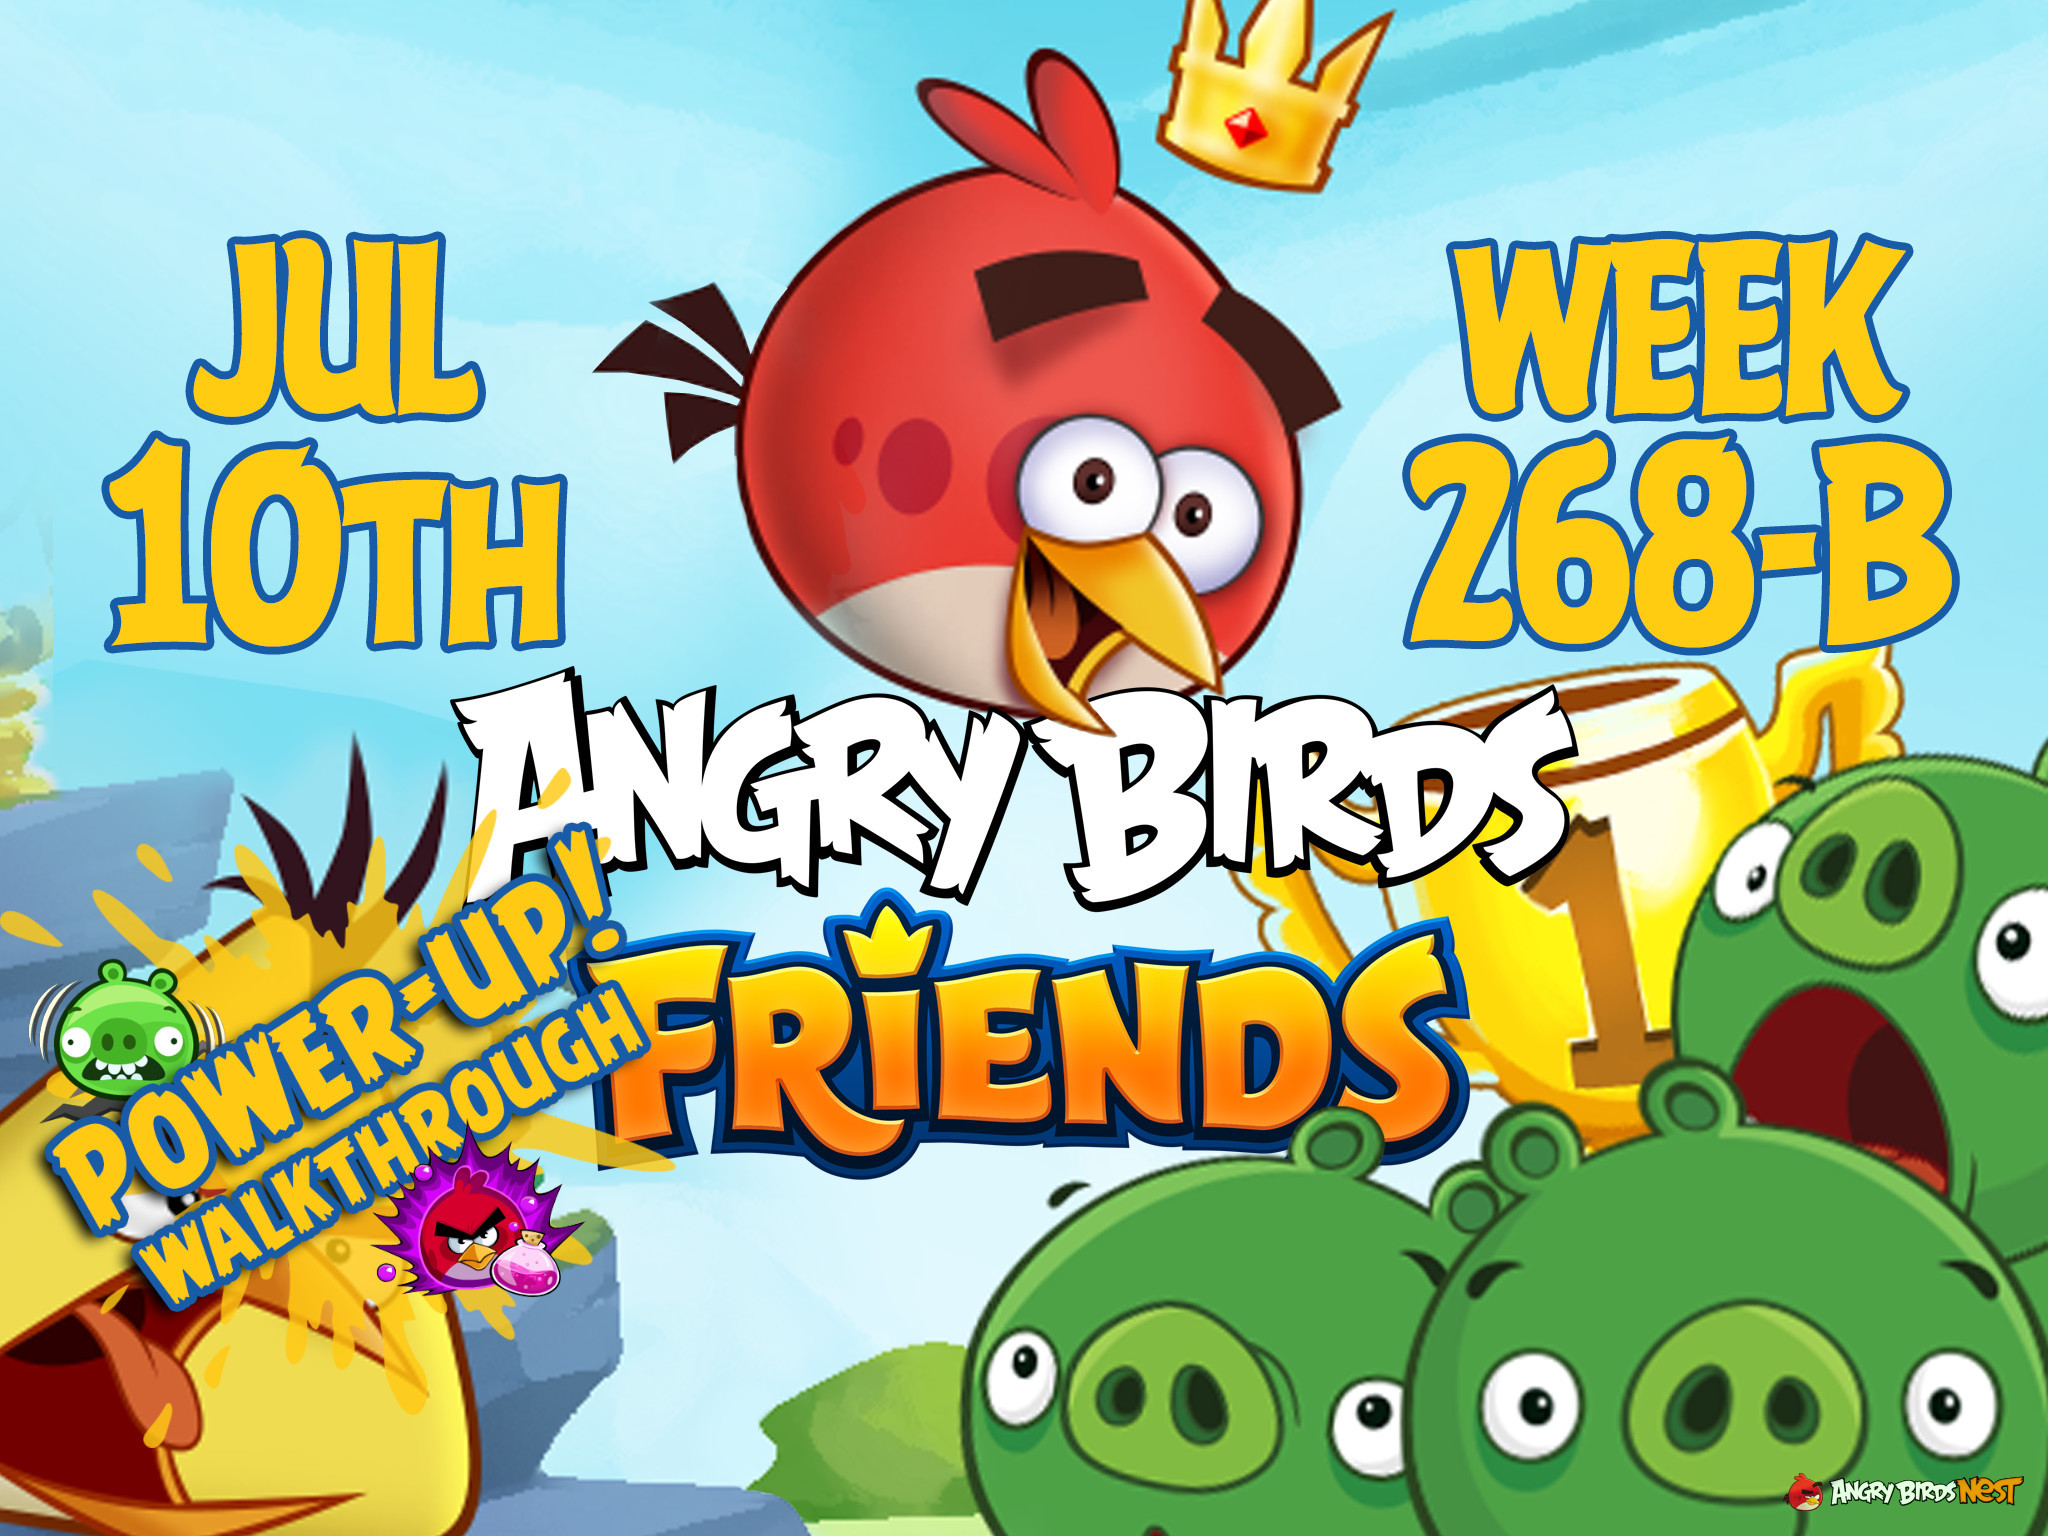 Angry Birds Friends Tournament Week 268-B Feature Image PU